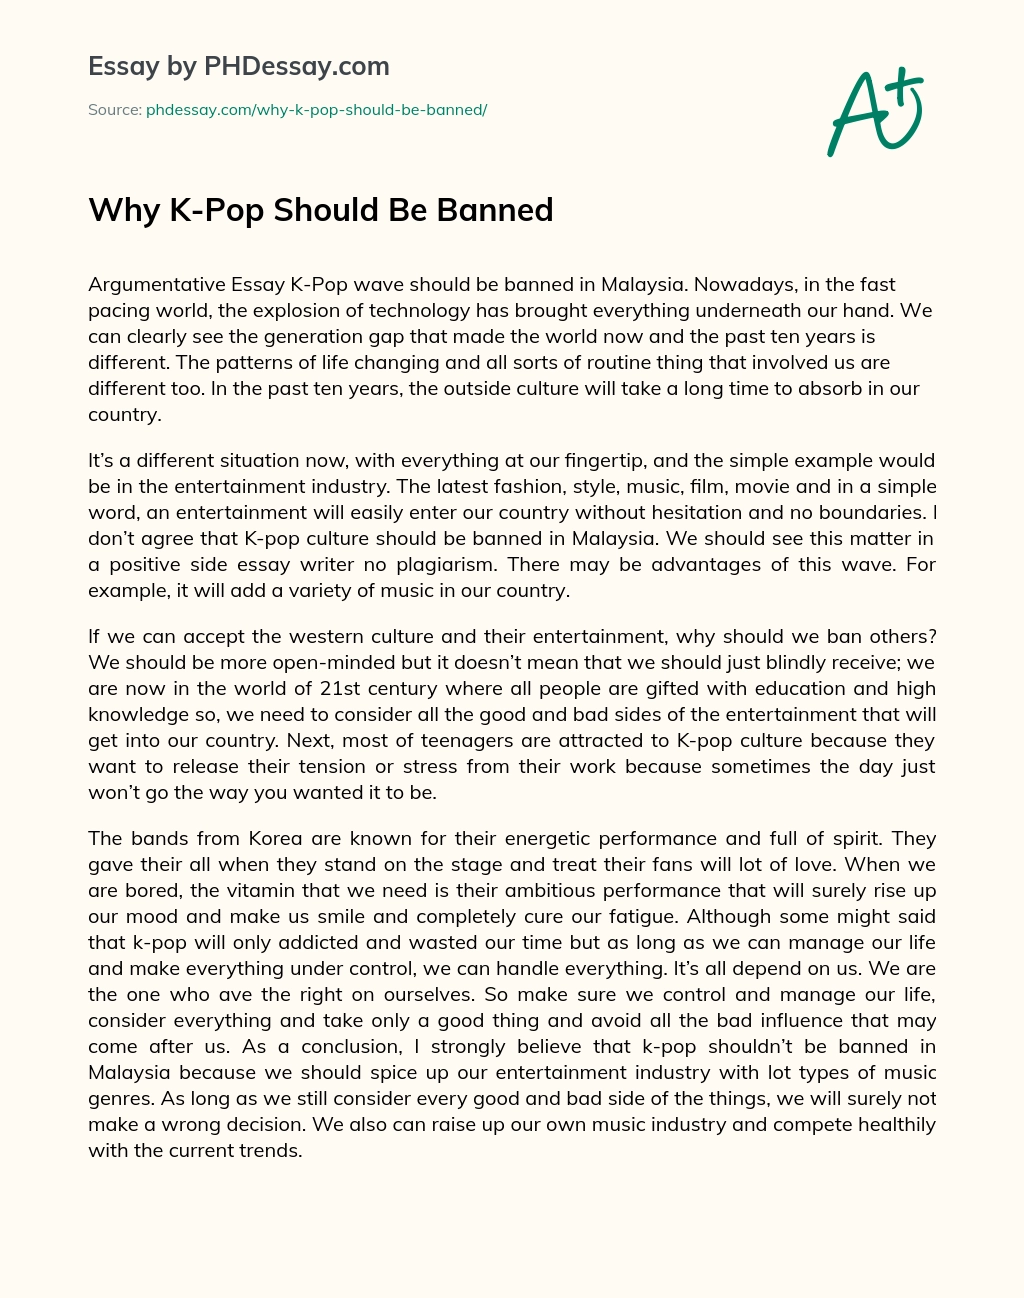 Why K-Pop Should Be Banned essay